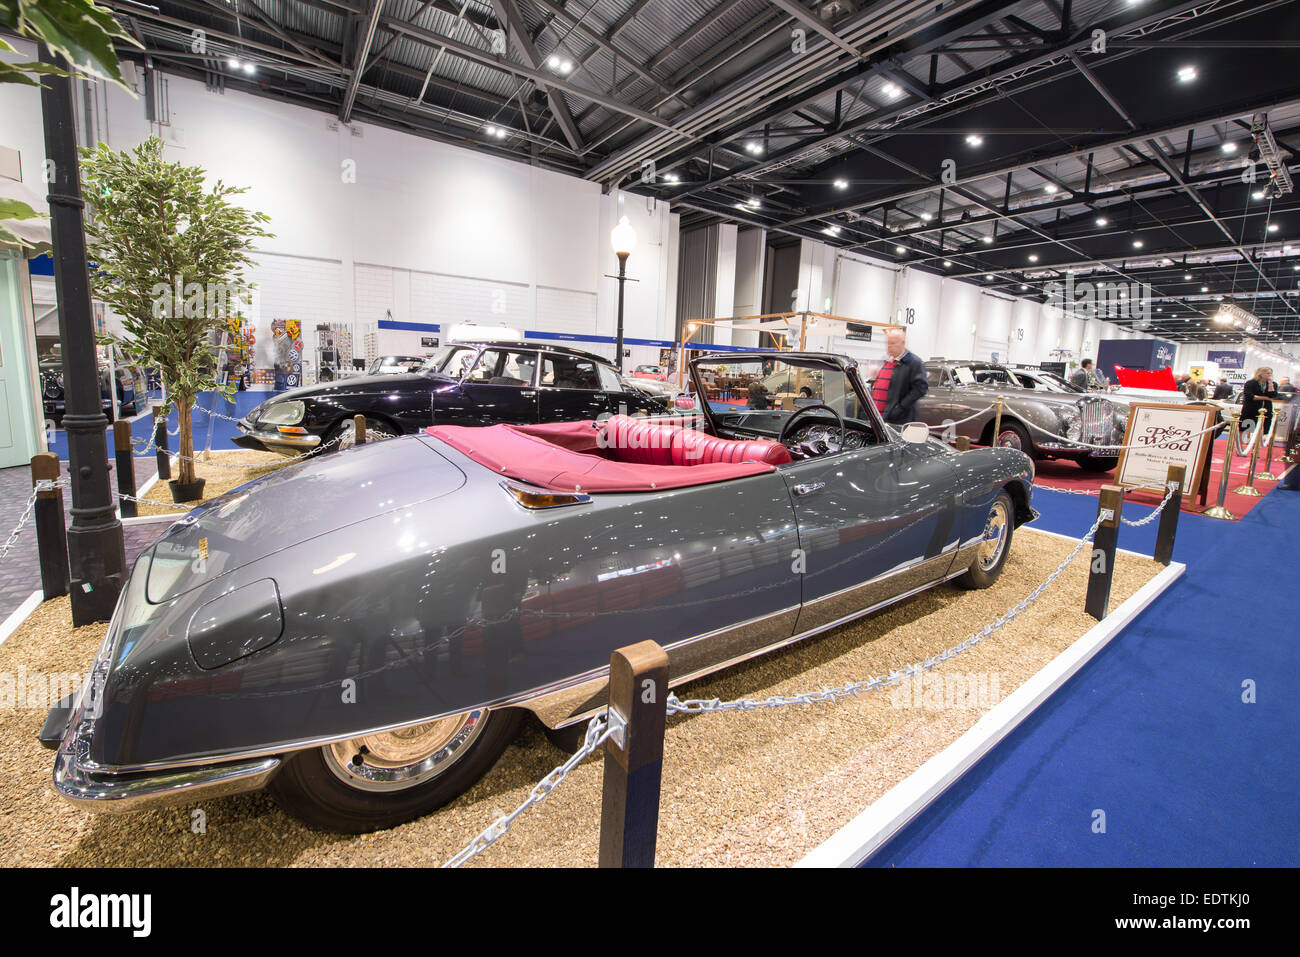 Citroen stand at The Classic Car Show in London Excel Stock Photo